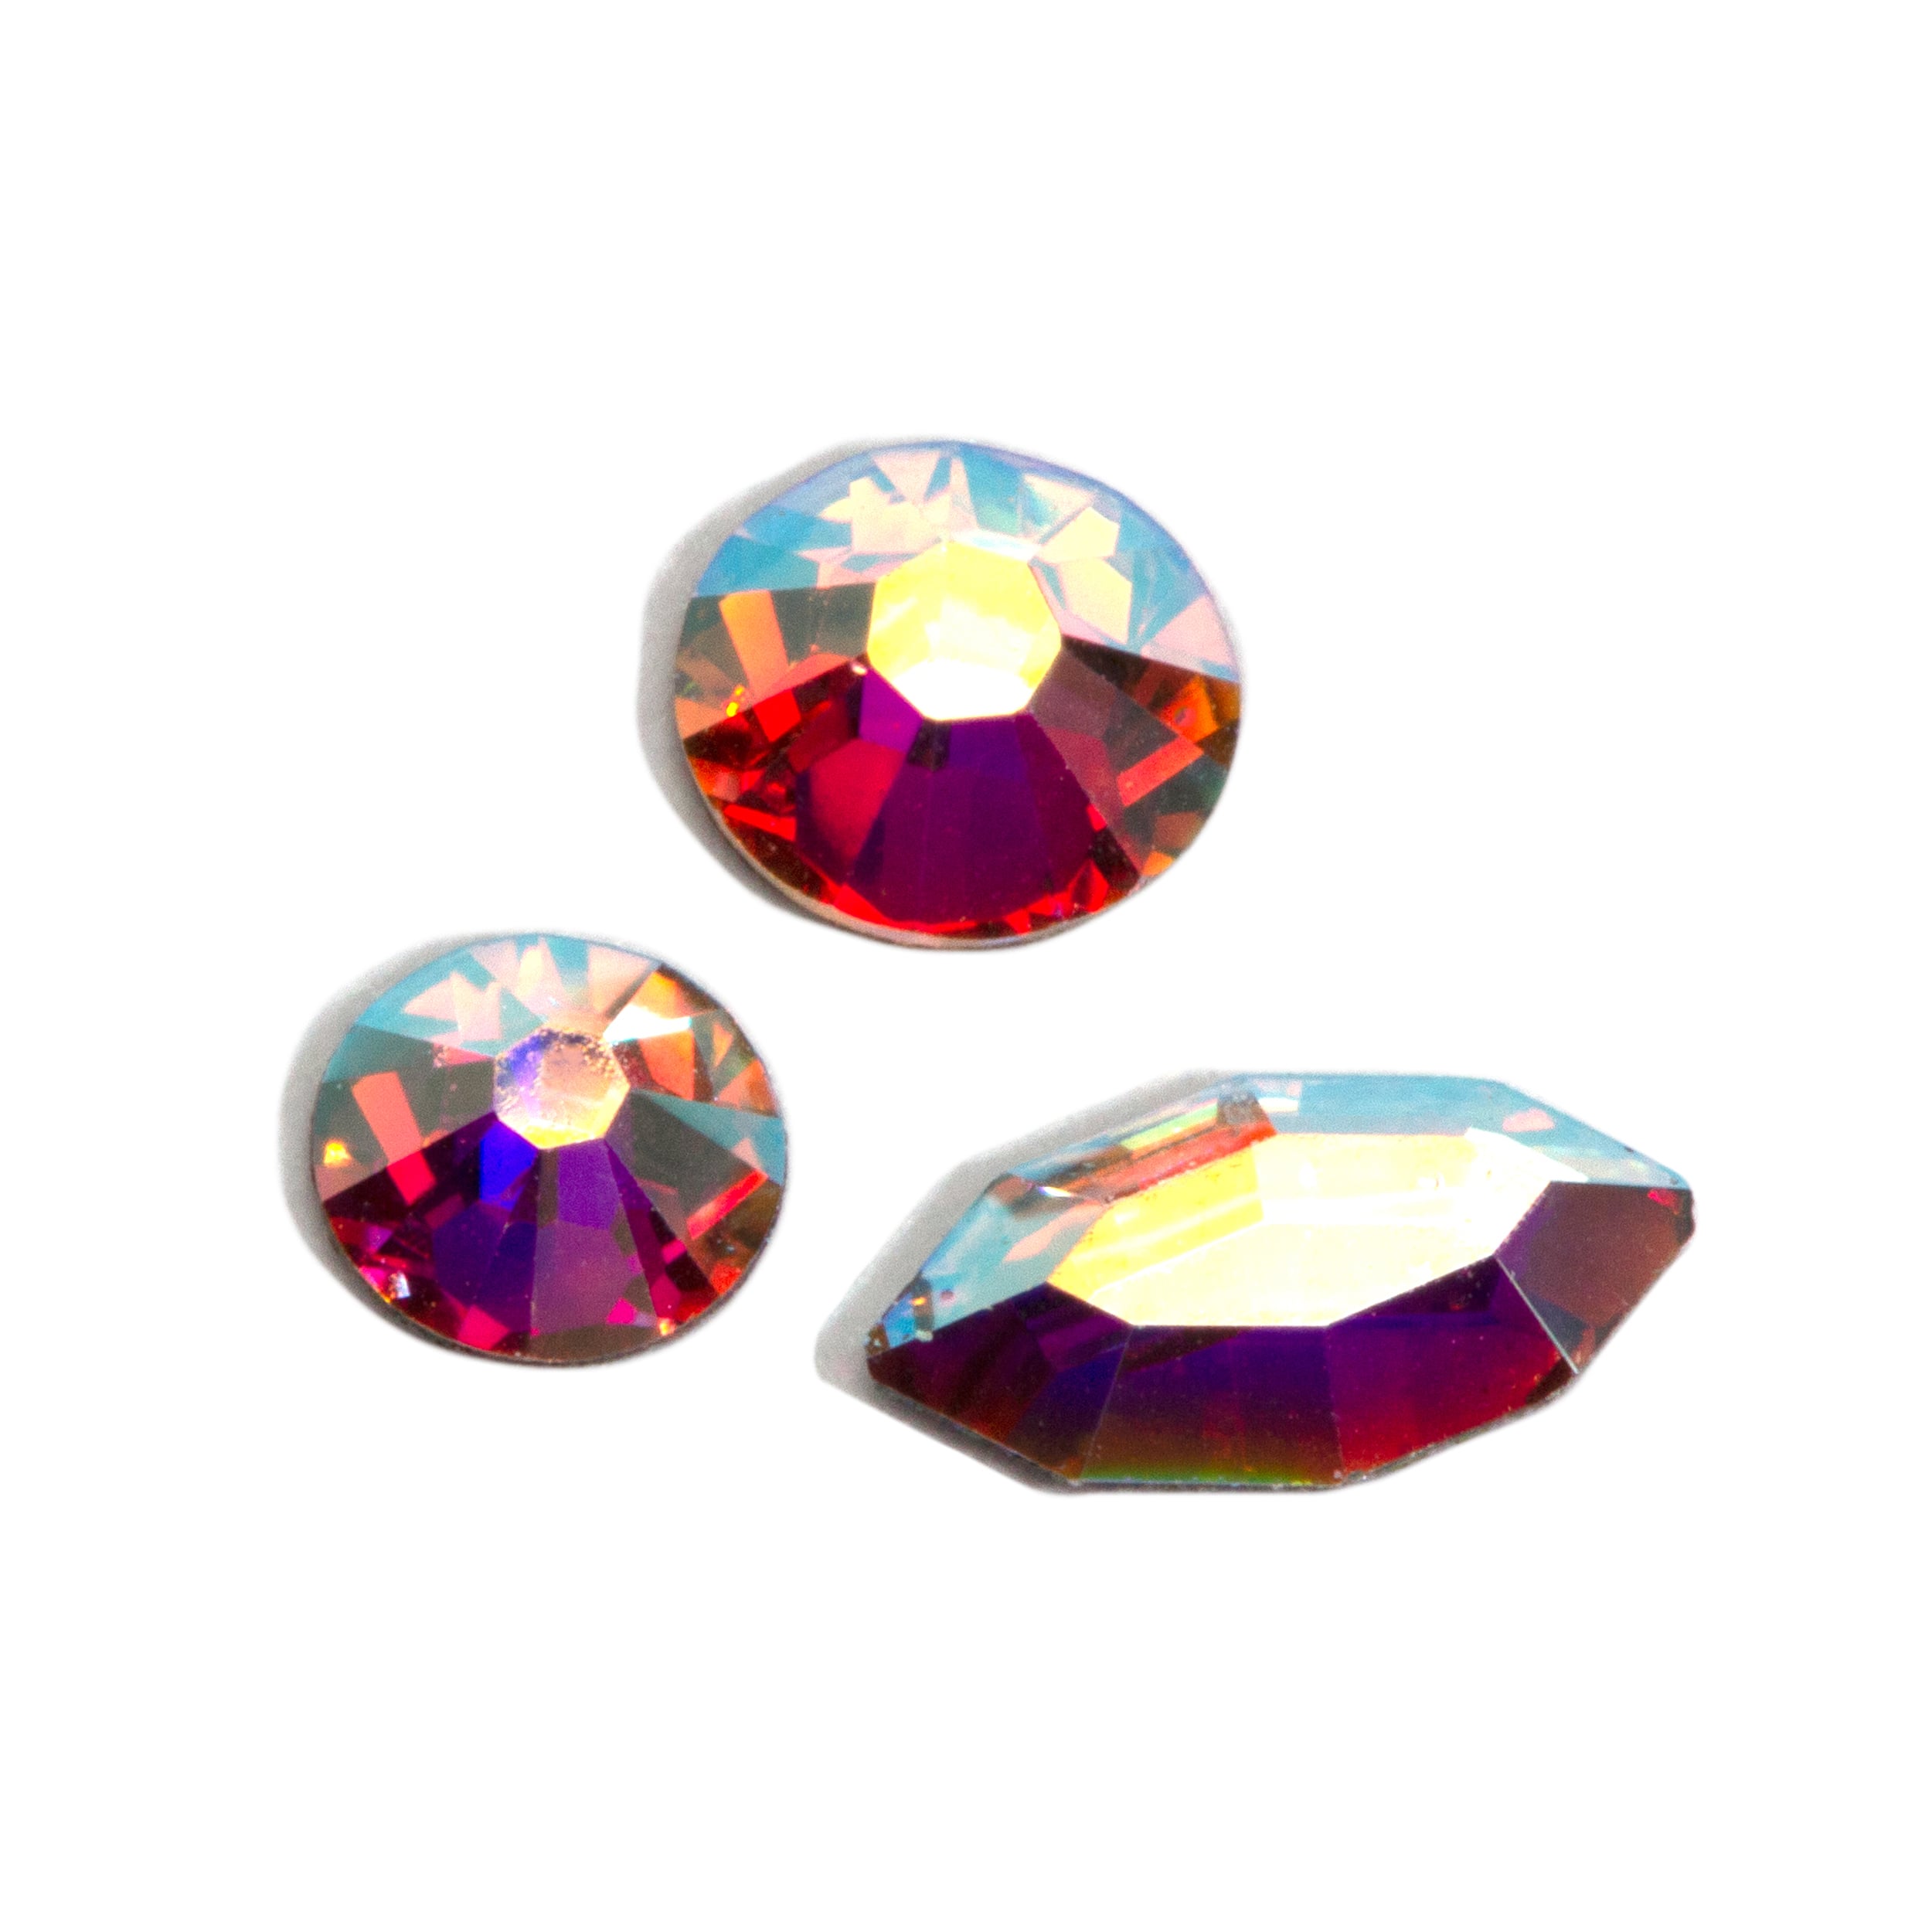 Crystal Radiance SS10 Flatback Austrian Crystals by Bead Landing 85ct. in Light Siam | Michaels